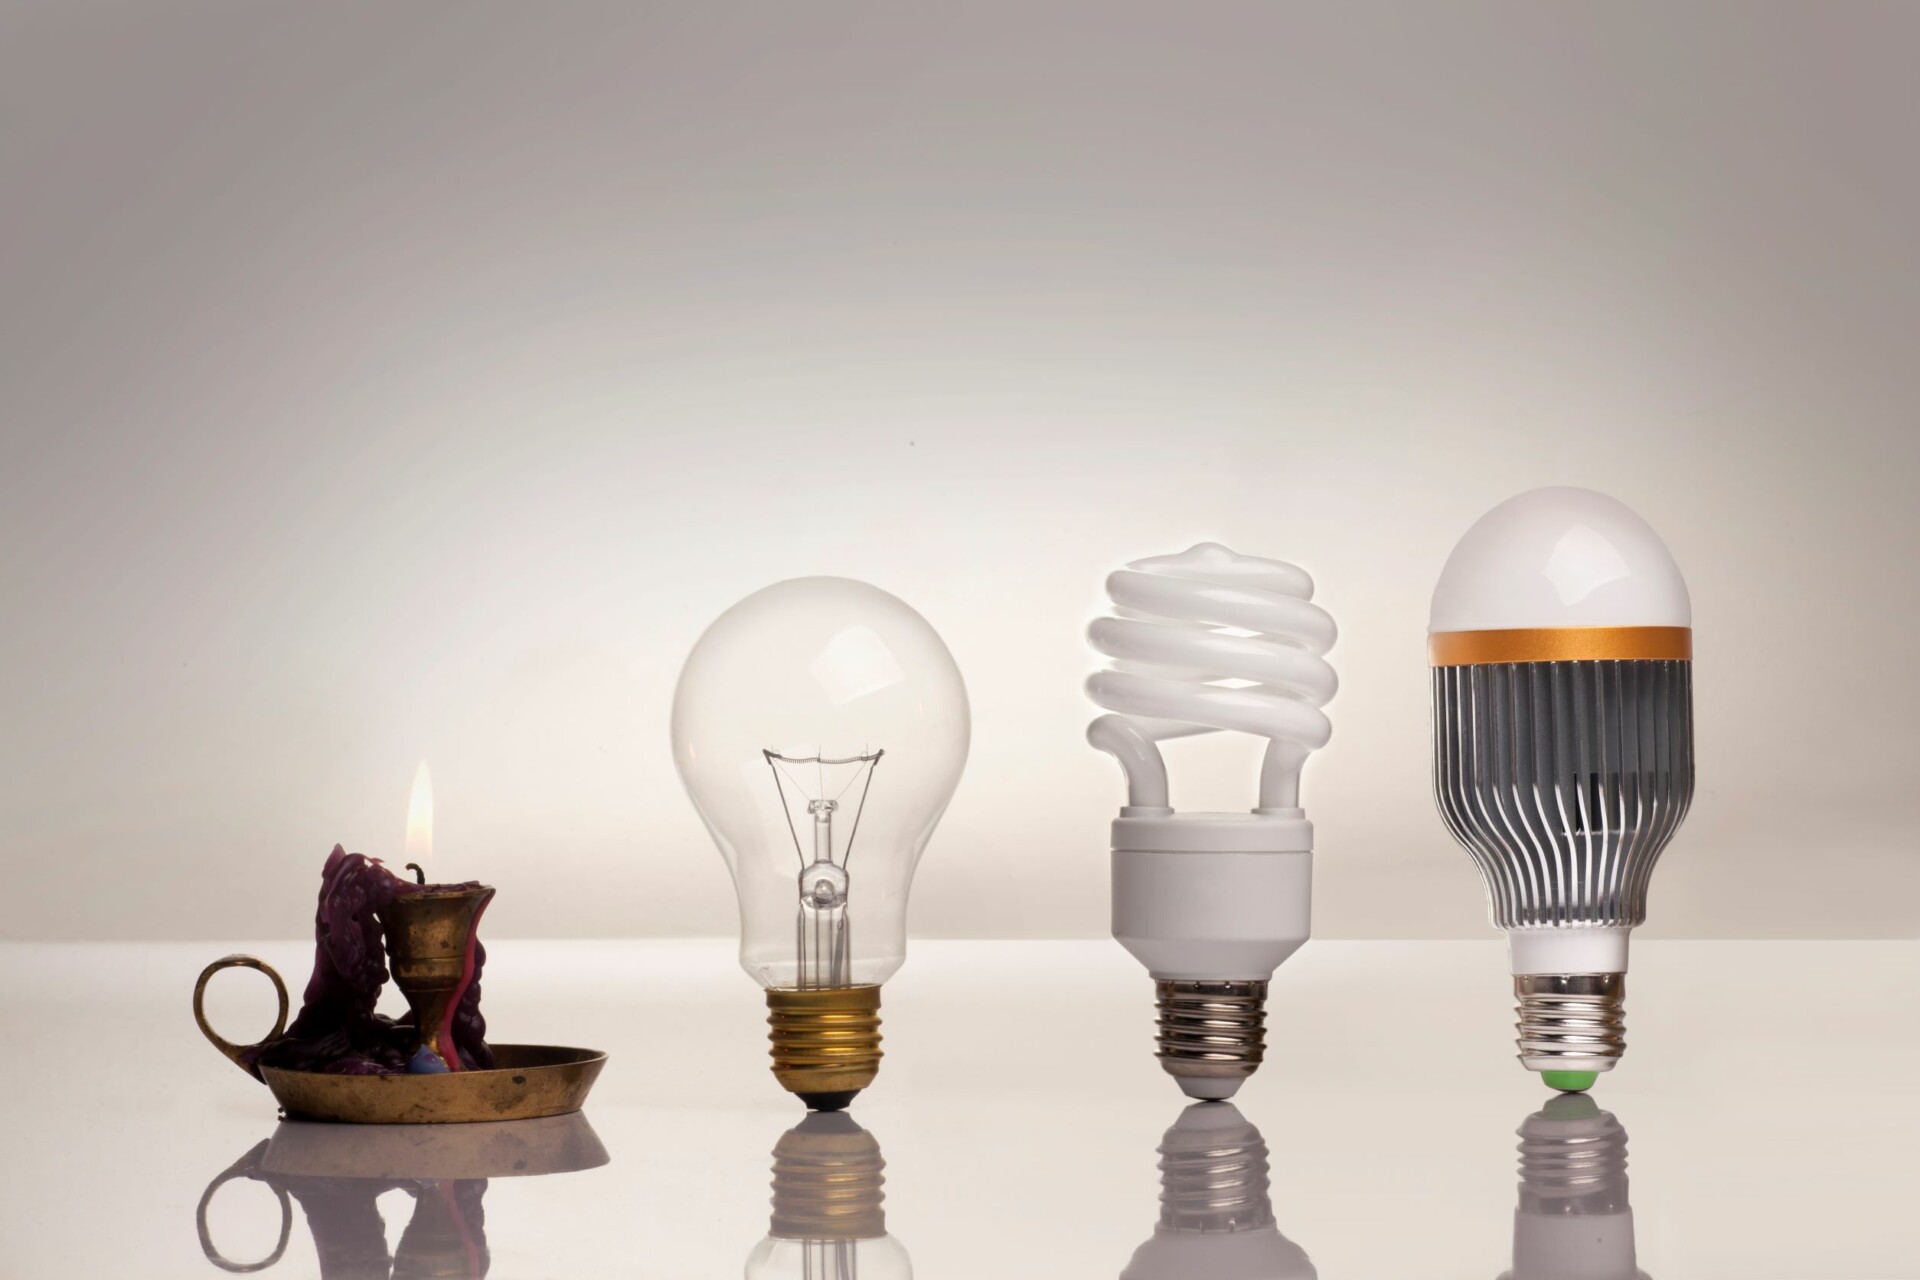 Are LED Lights Bad for the Environment? 6 Quick Facts